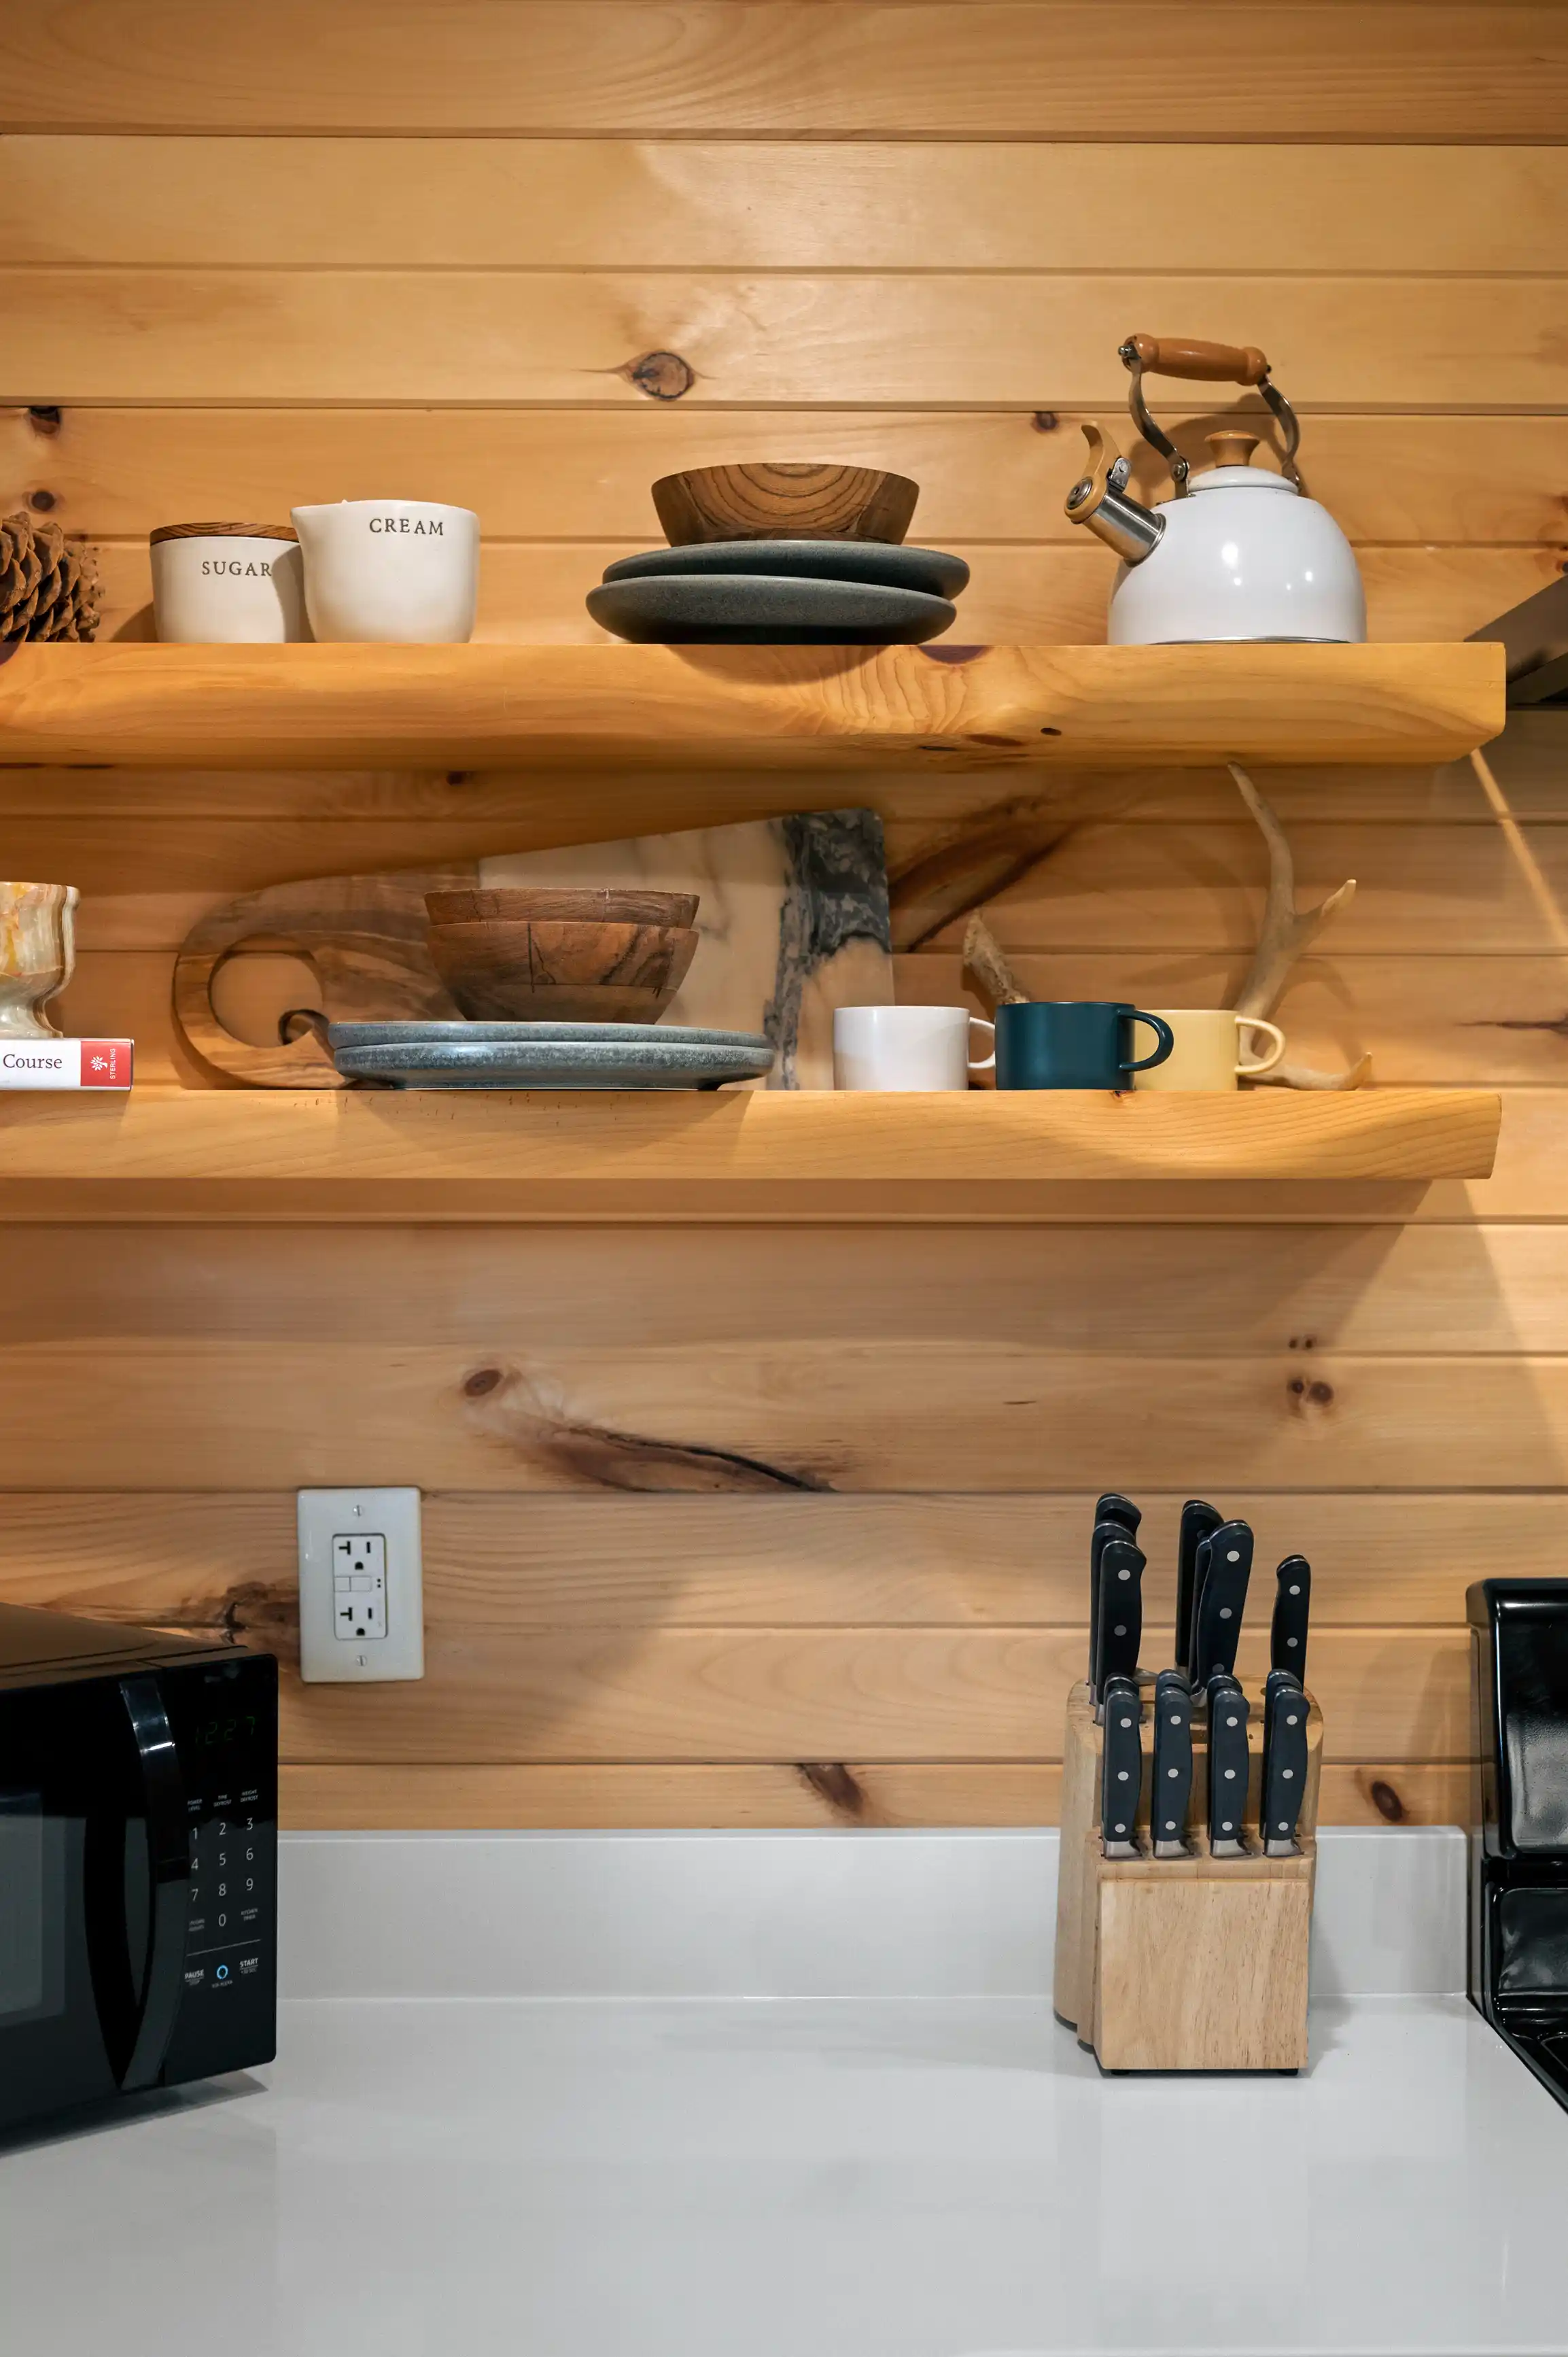 A cozy kitchen interior with wooden shelves holding a tea kettle, mugs, and canisters labeled 'SUGAR' and 'CREAM', above a counter with a knife block and a microwave.